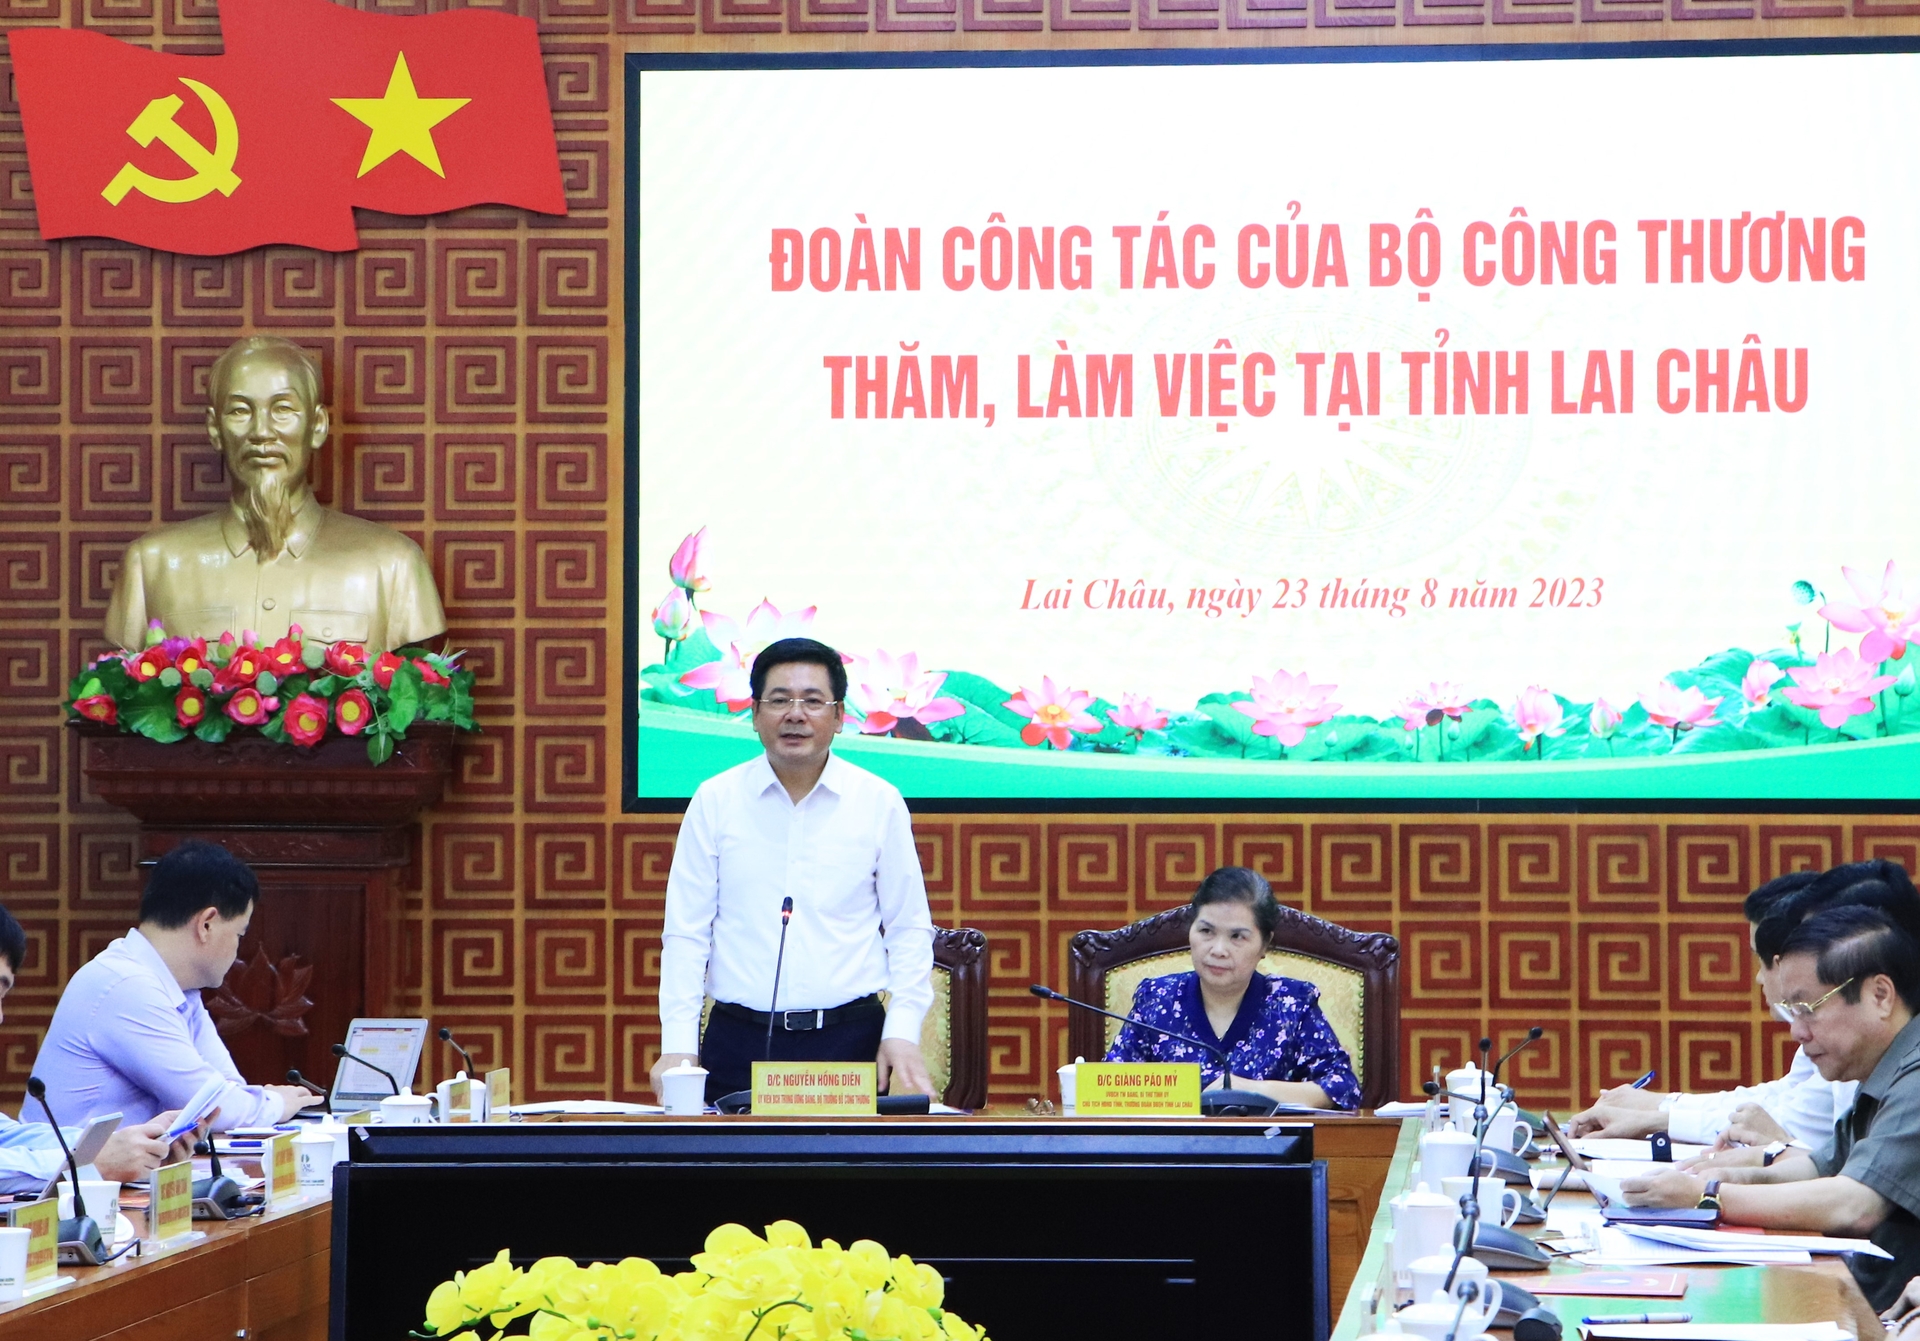 Minister of Industry and Trade Nguyen Hong Dien spoke at the meeting. Photo: C.N.